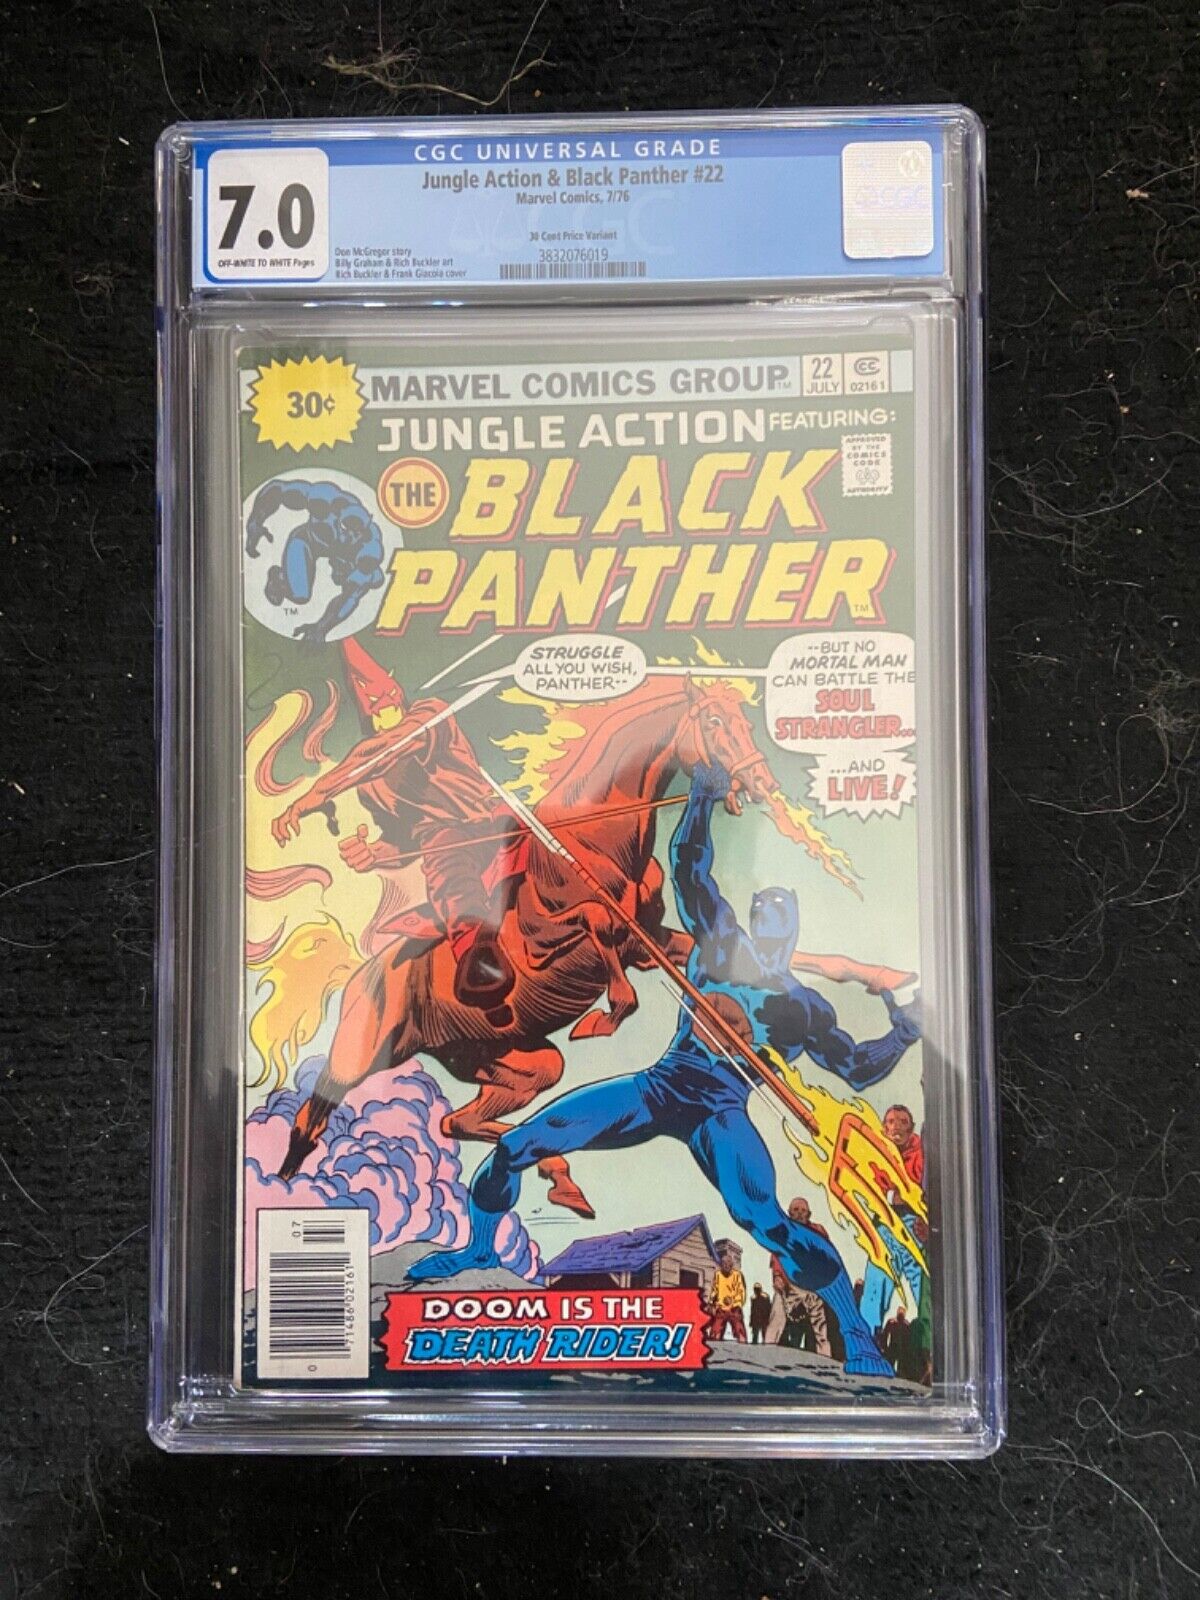 Jungle Action #22, 7.0 CGC FN/VF, 30 Cent Price Variant; Black Panther